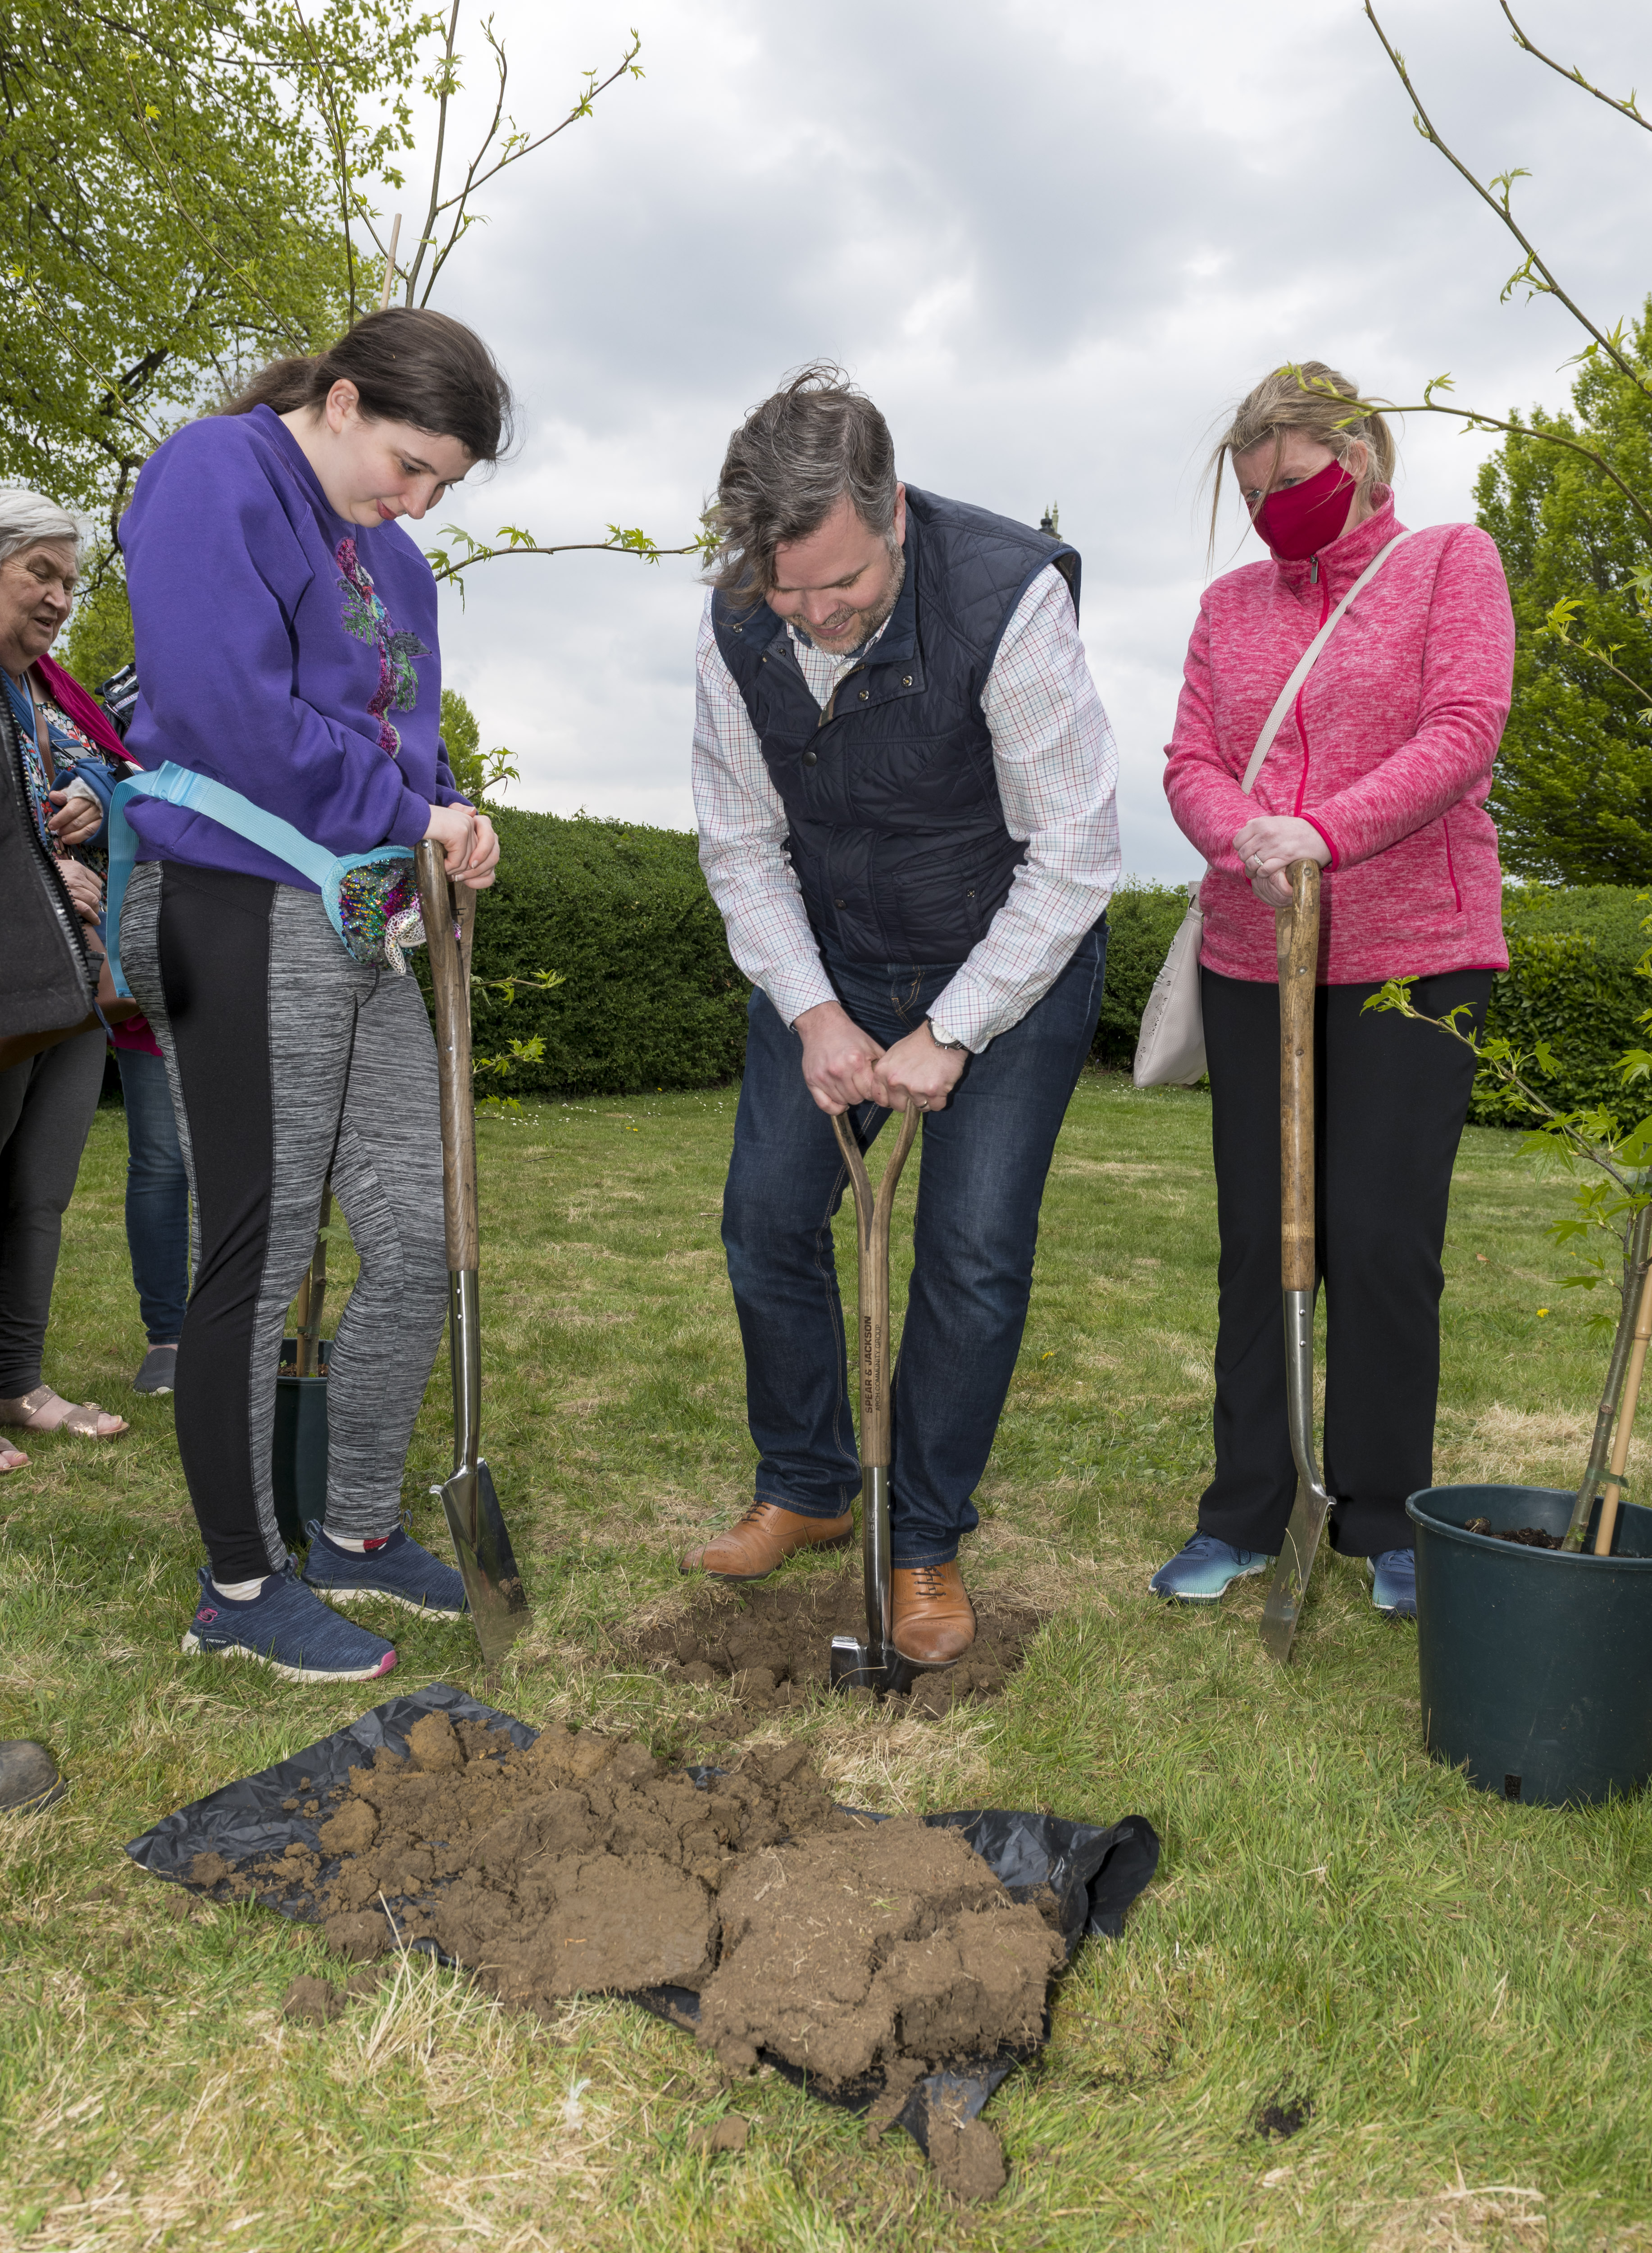 This is the start of a town-wide project that will see trees planted in various locations to mark Queen Elizabeth’s Platinum Jubilee. 